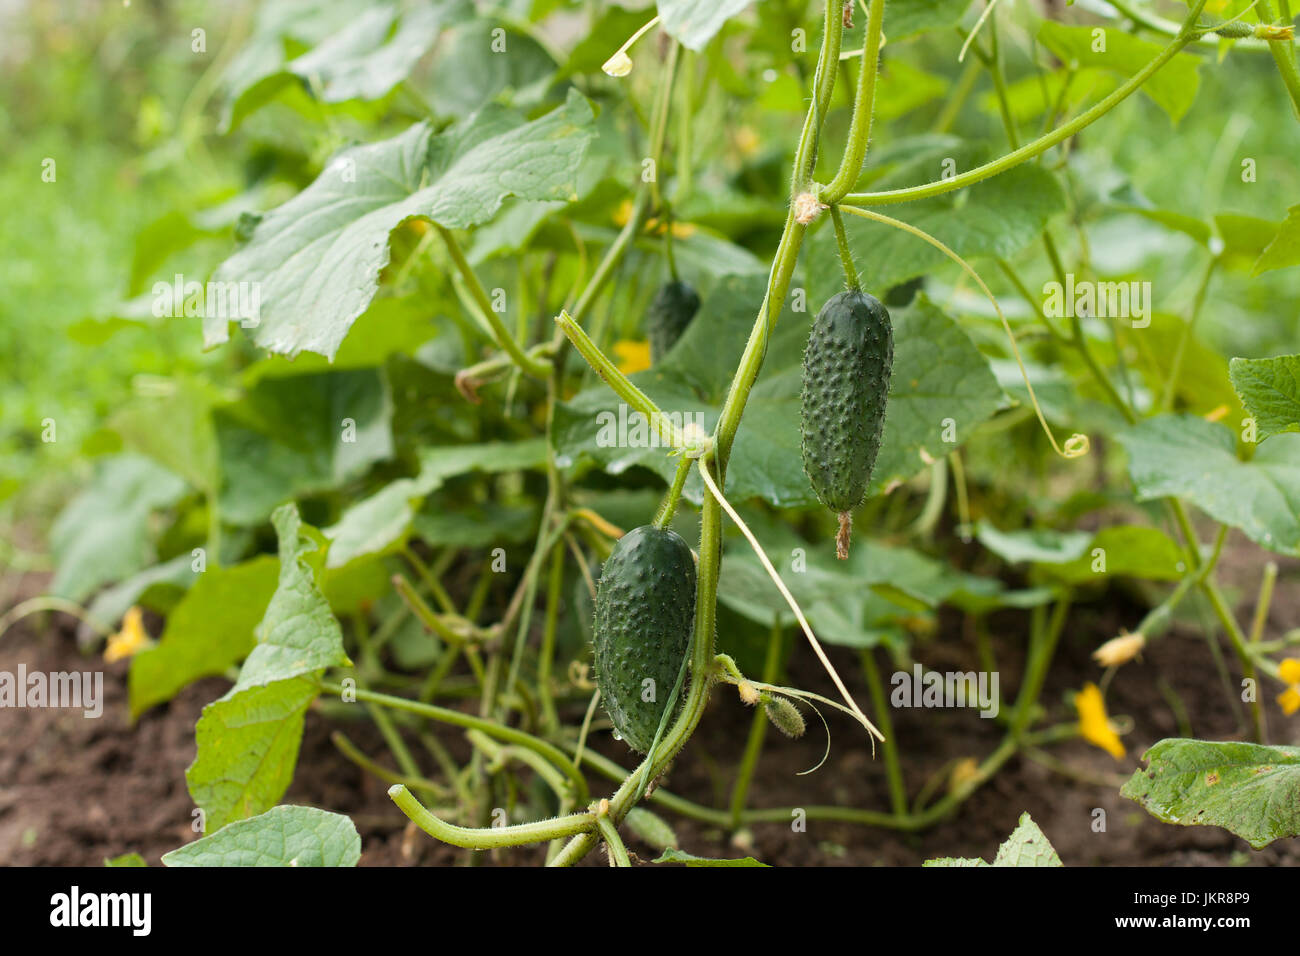 Species Of Green Plants Of Cucumbers On Vegetable Garden In Summertime. Fresh Young Organic Cucumbers. Stock Photo